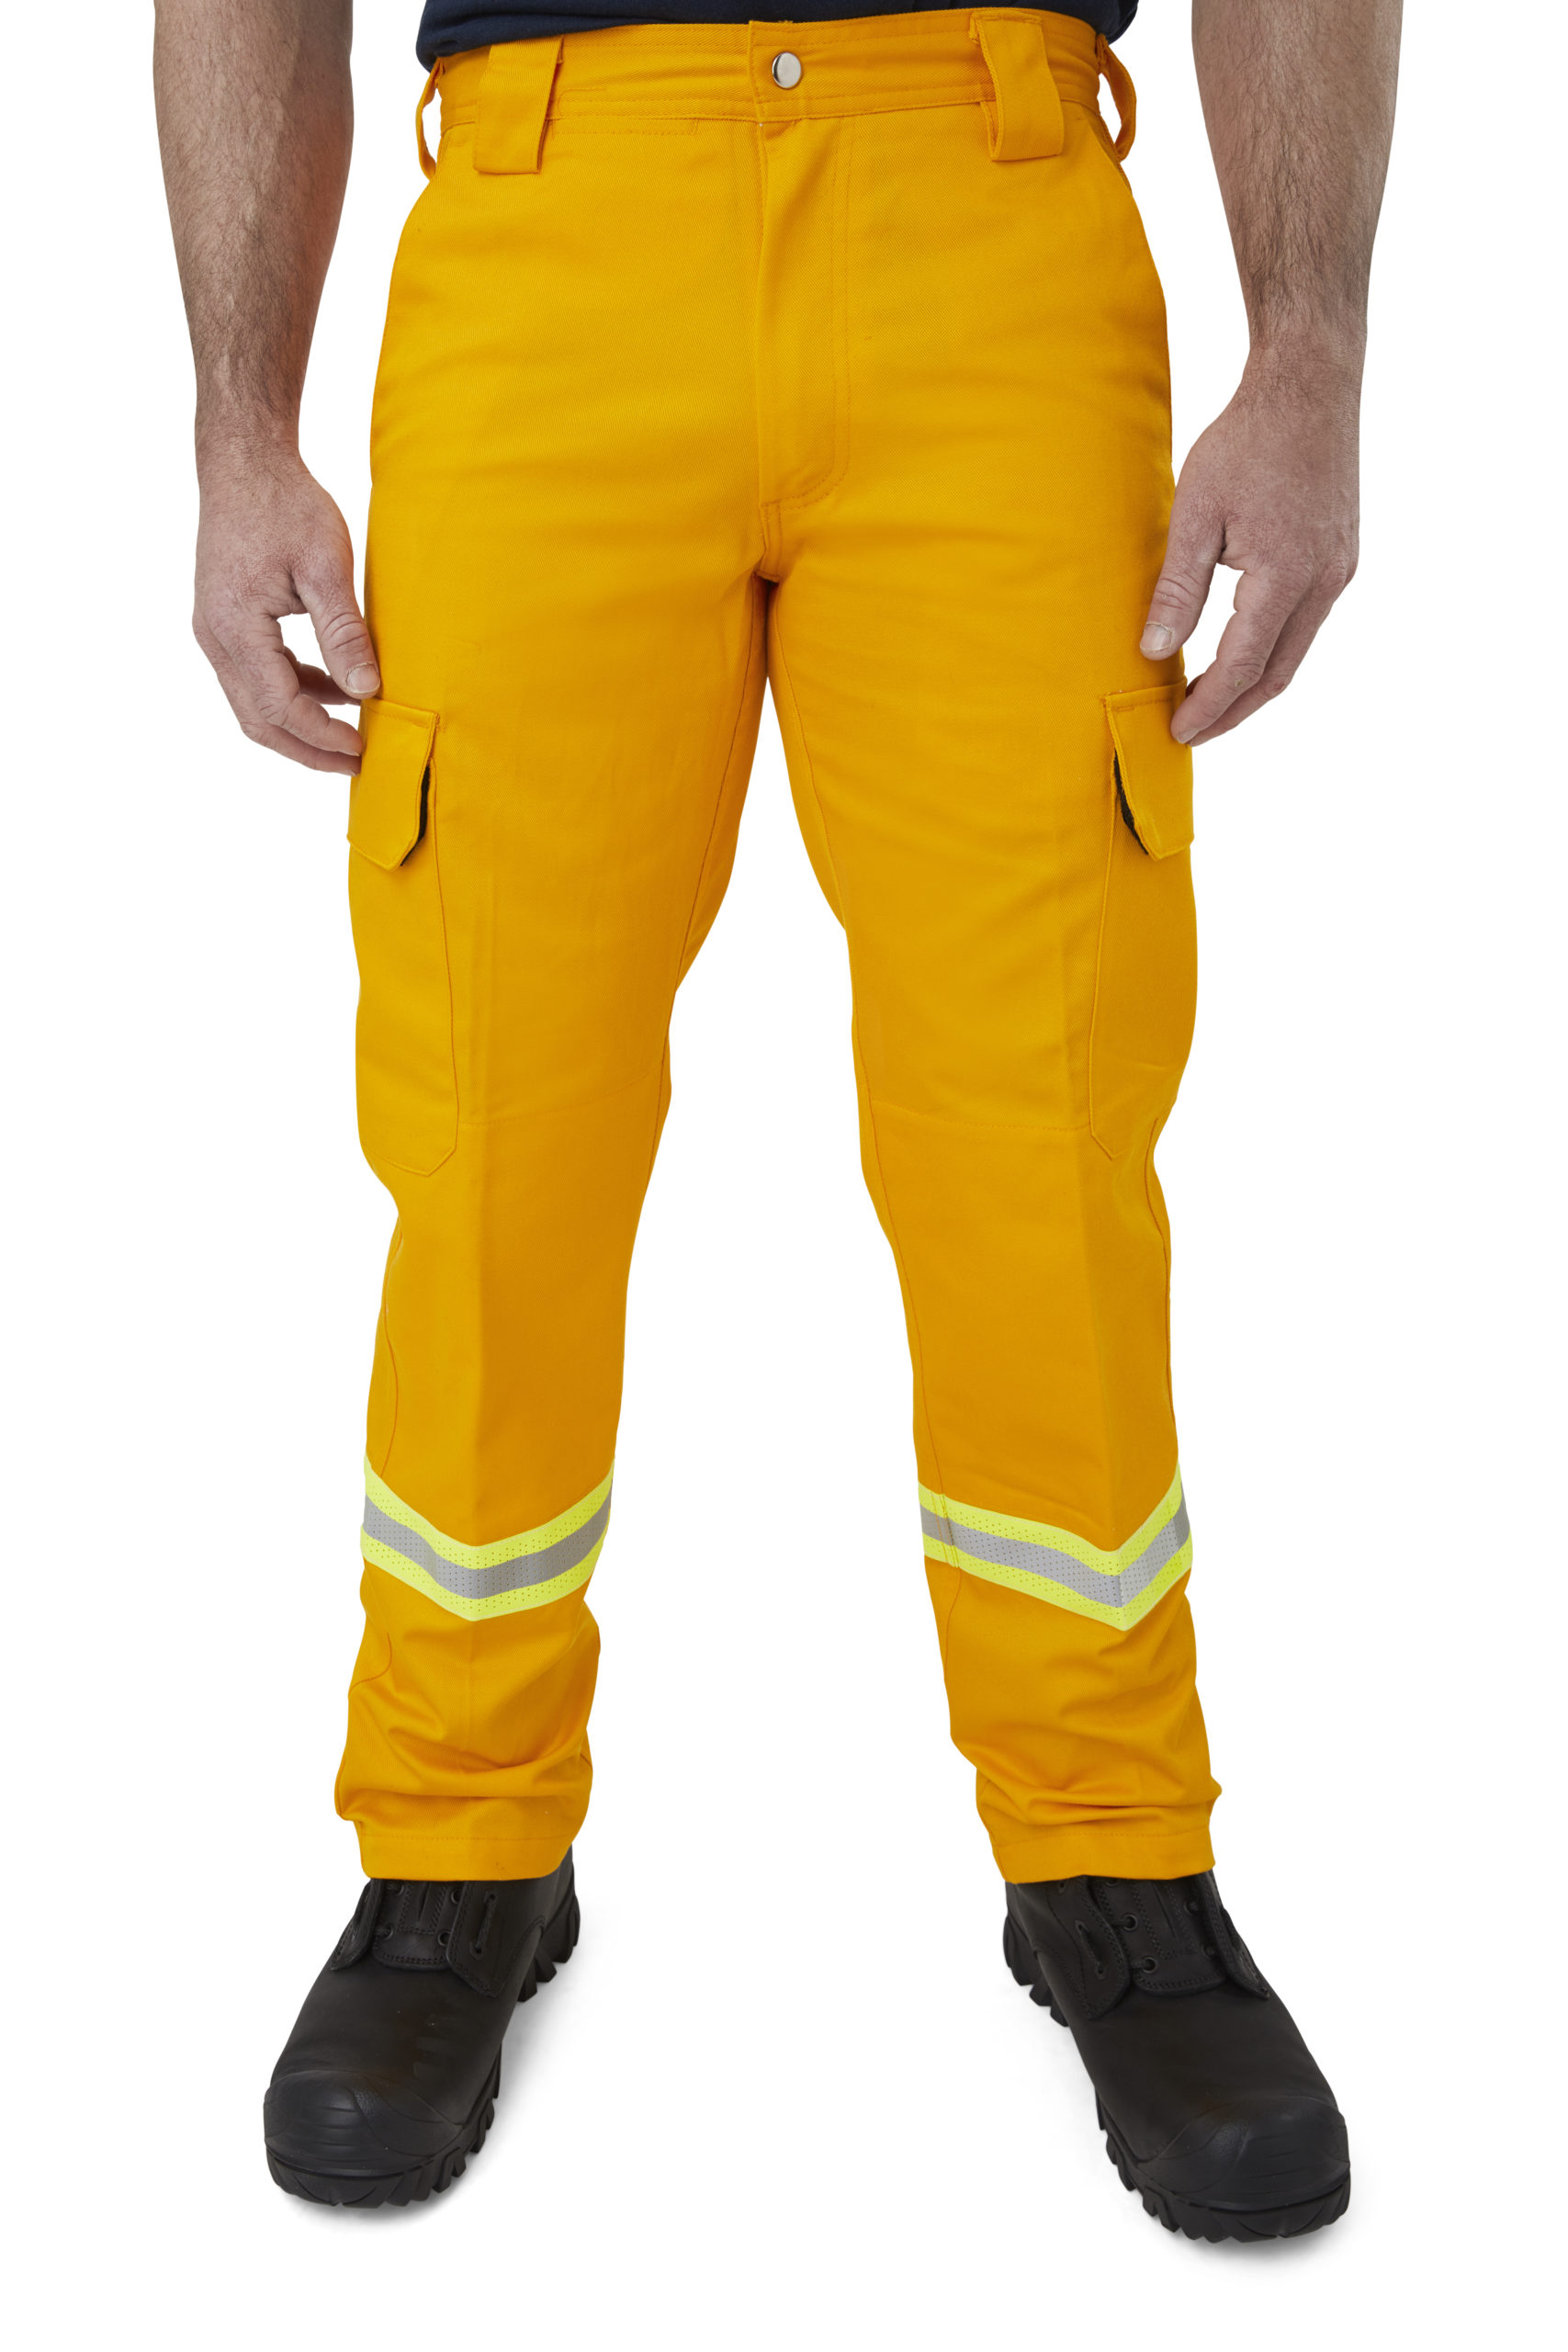 wildland pant T540 front scaled 1